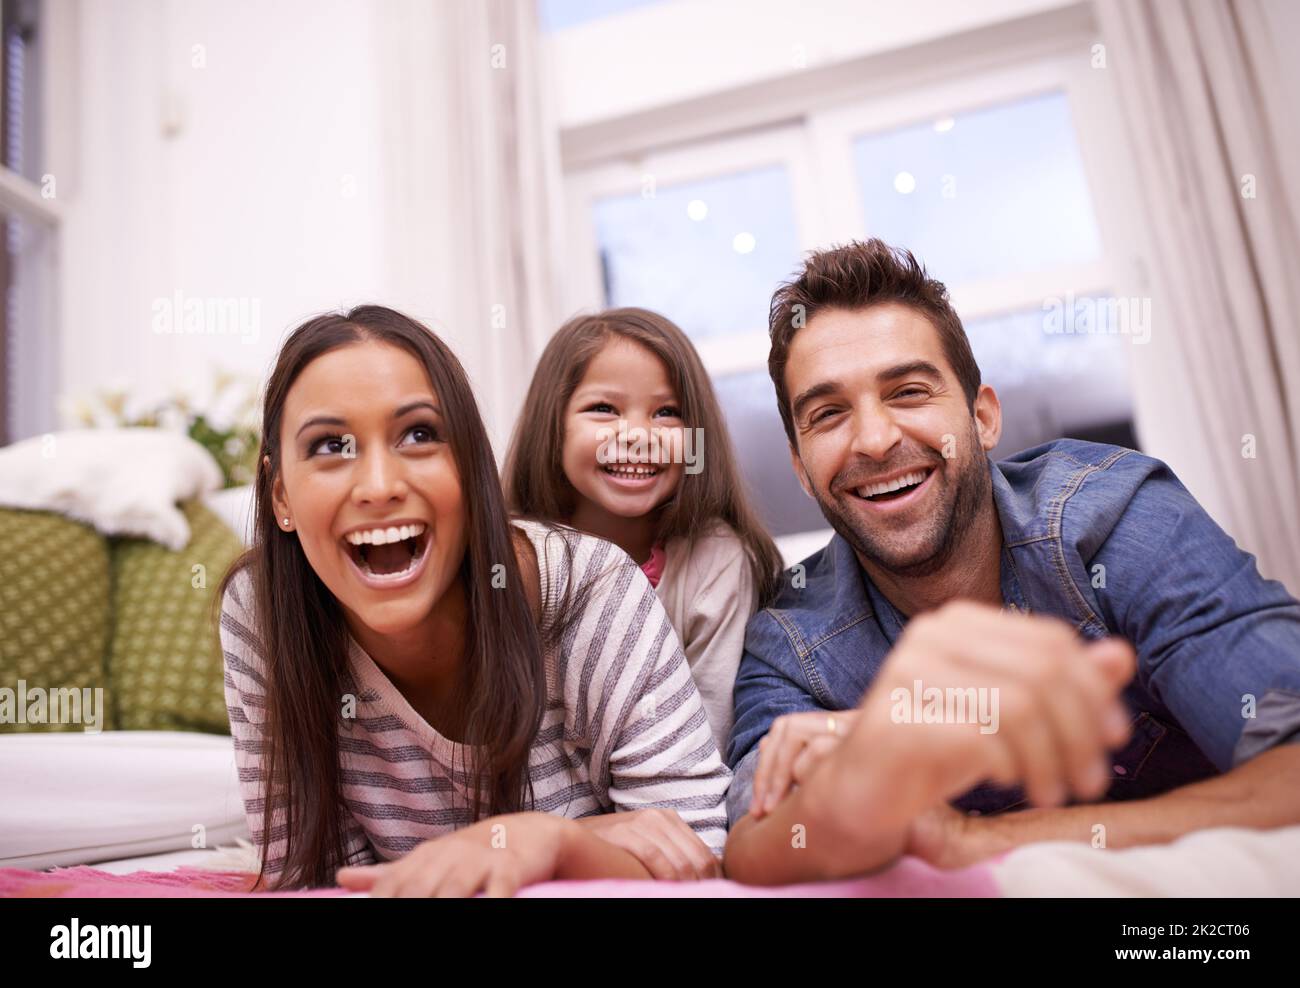 Love and laughter at home. Portrait of a happy young family at home. Stock Photo